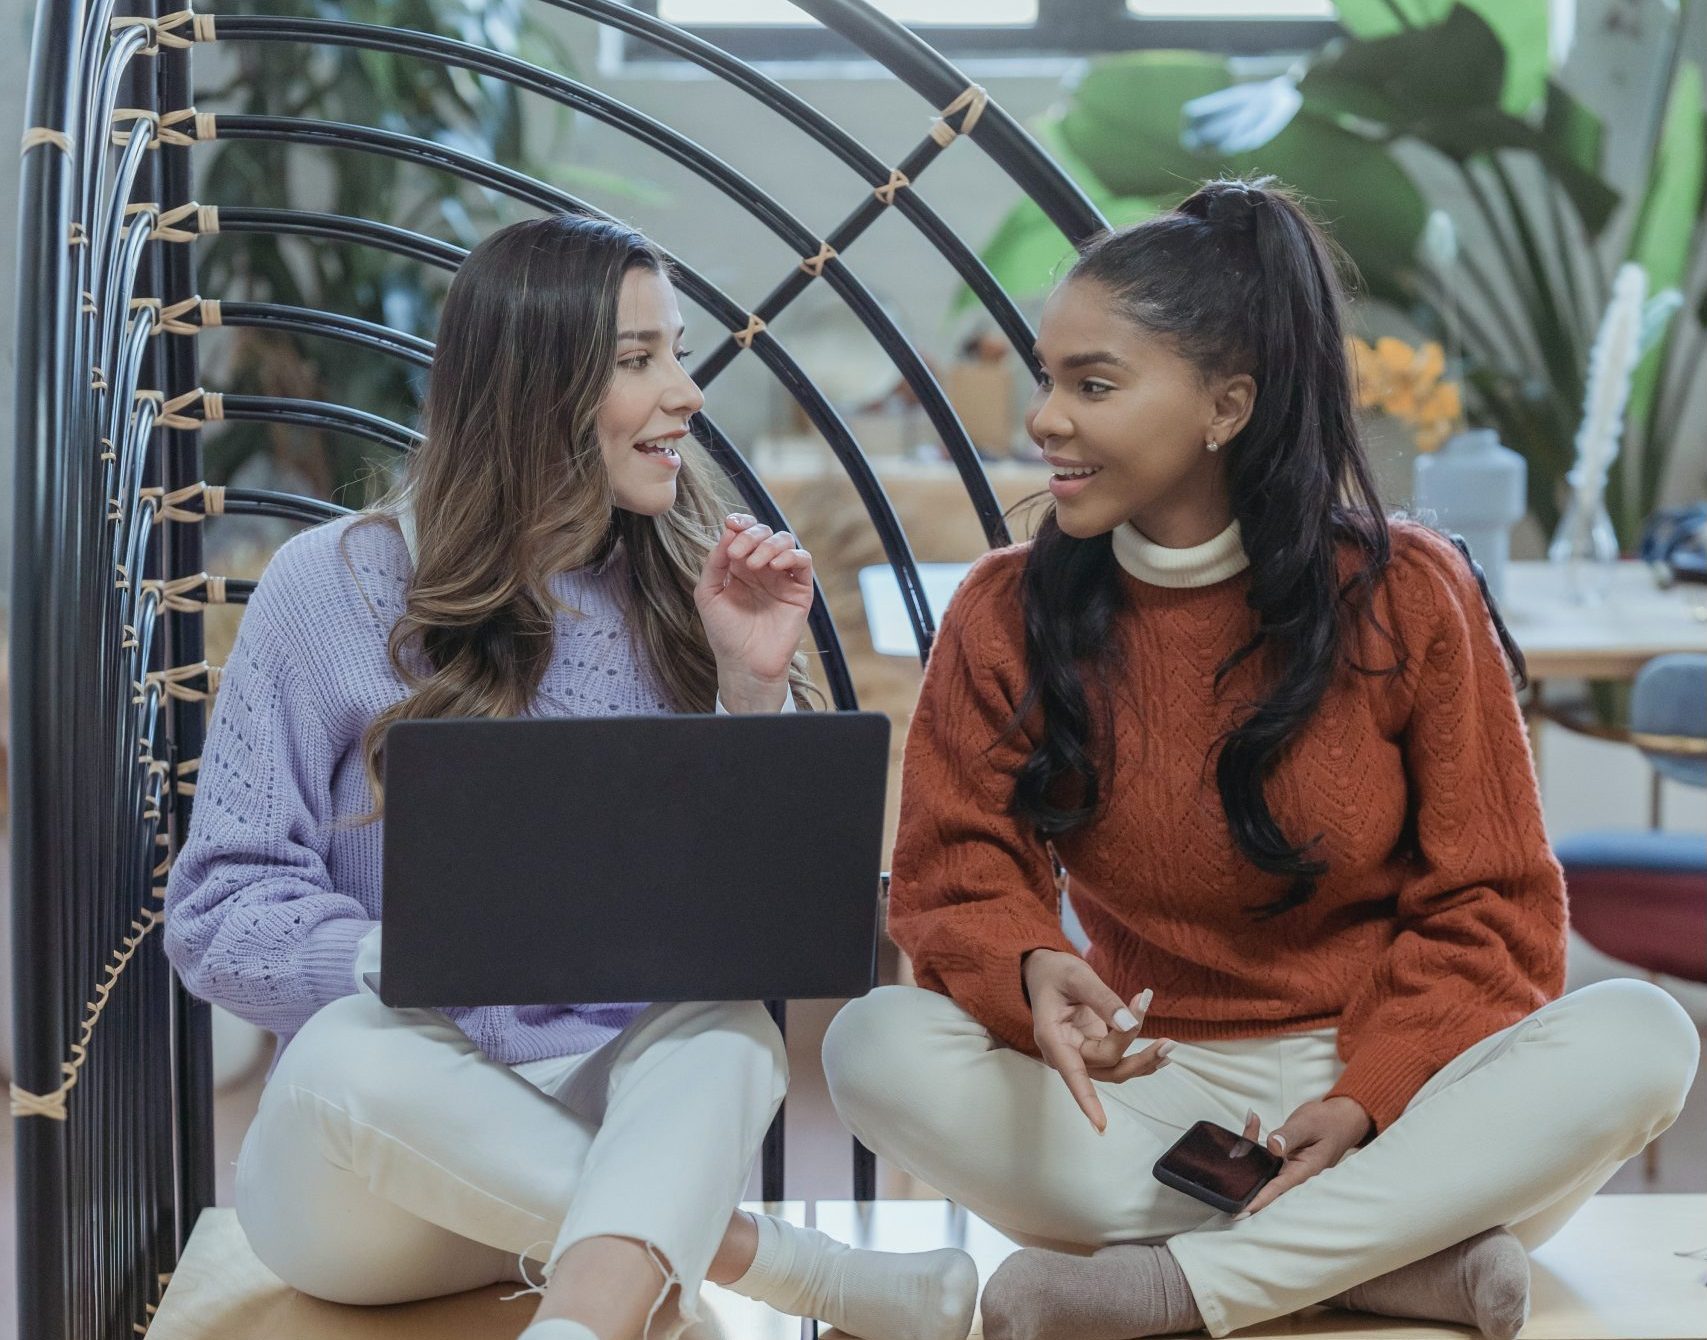 Two young women sit with a laptop infront of them. They look at eachother and smile.